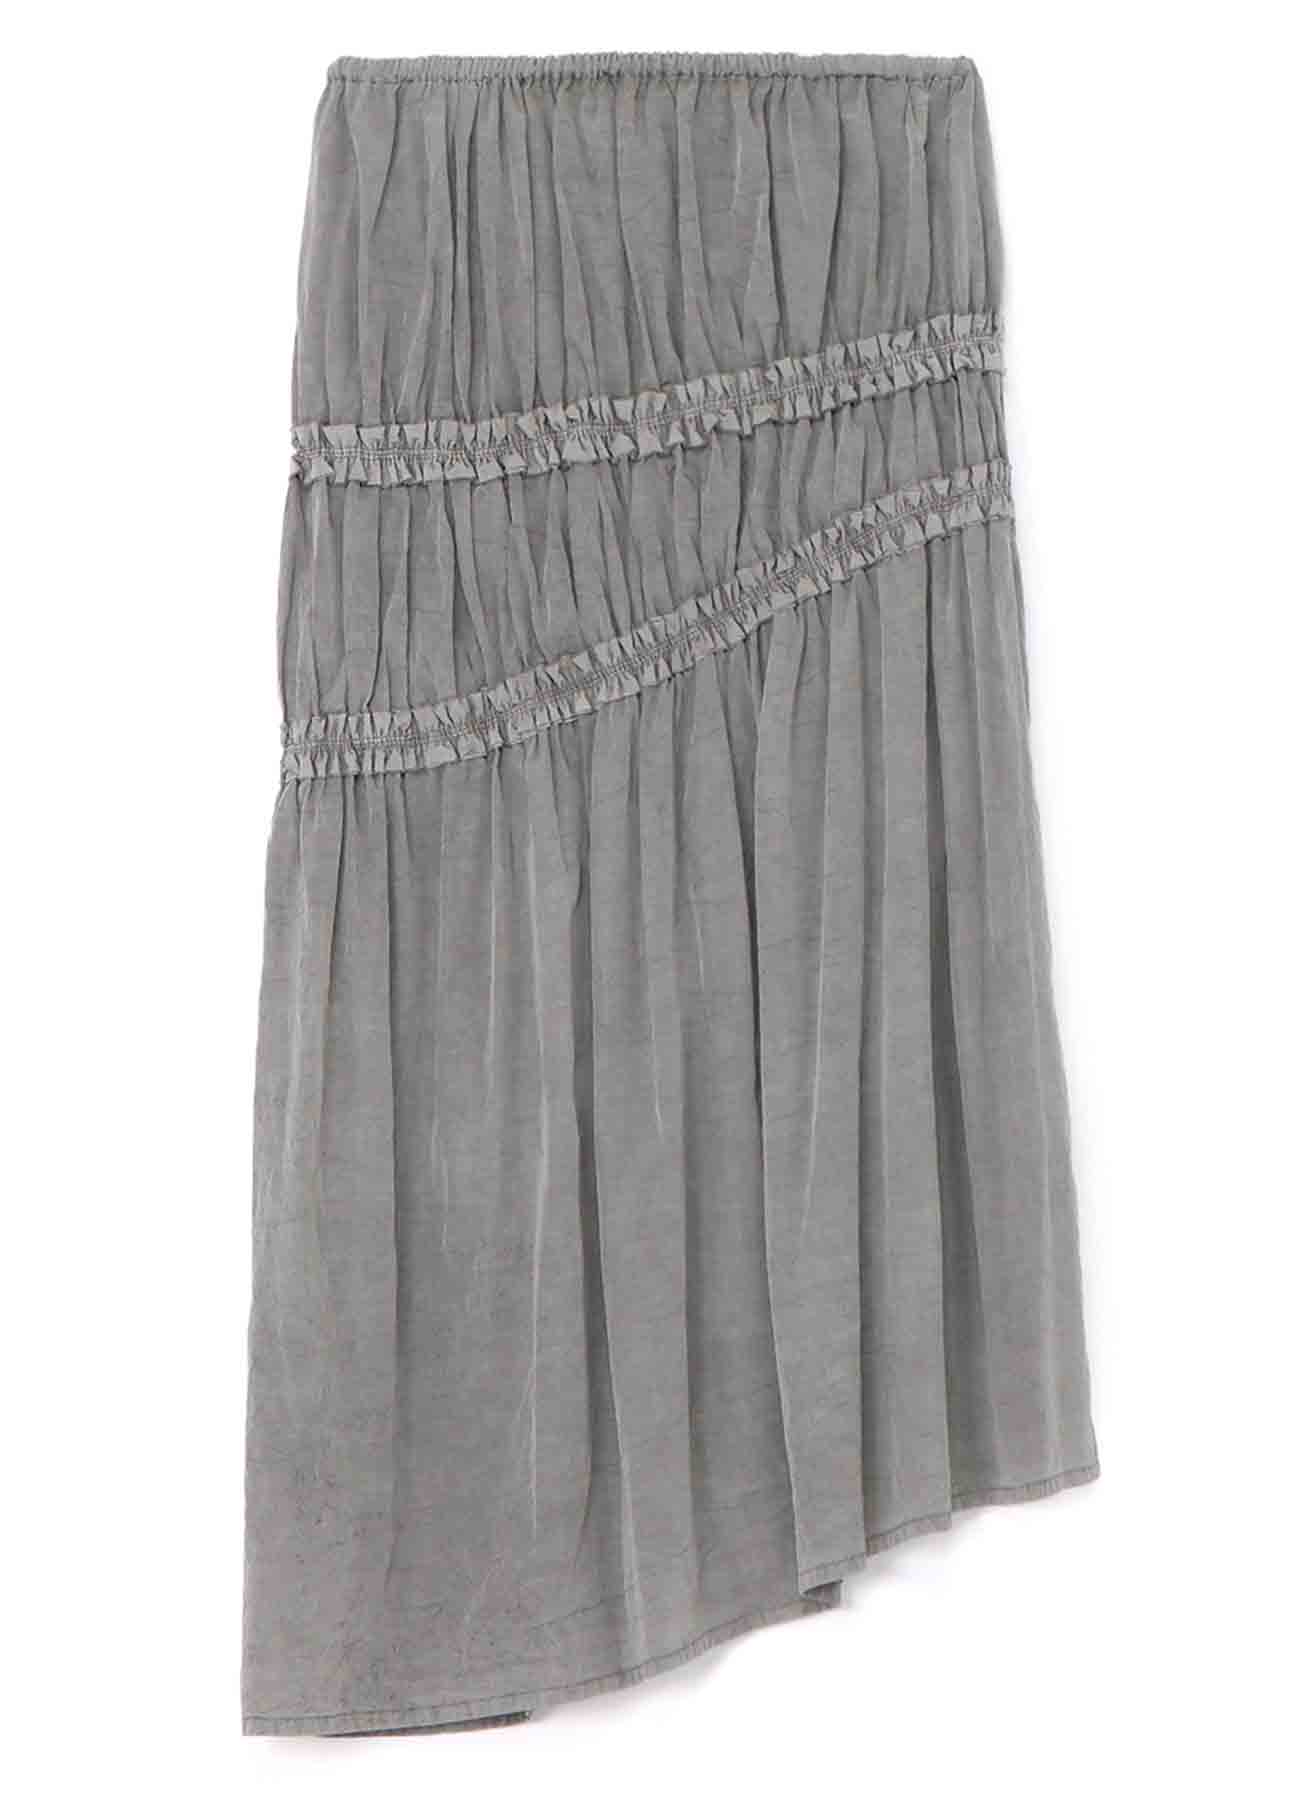 CUPRA COTTON PRODUCT PIGMENT DYED WRINKLED LAWN ASYMMETRY GATHER SKIRT